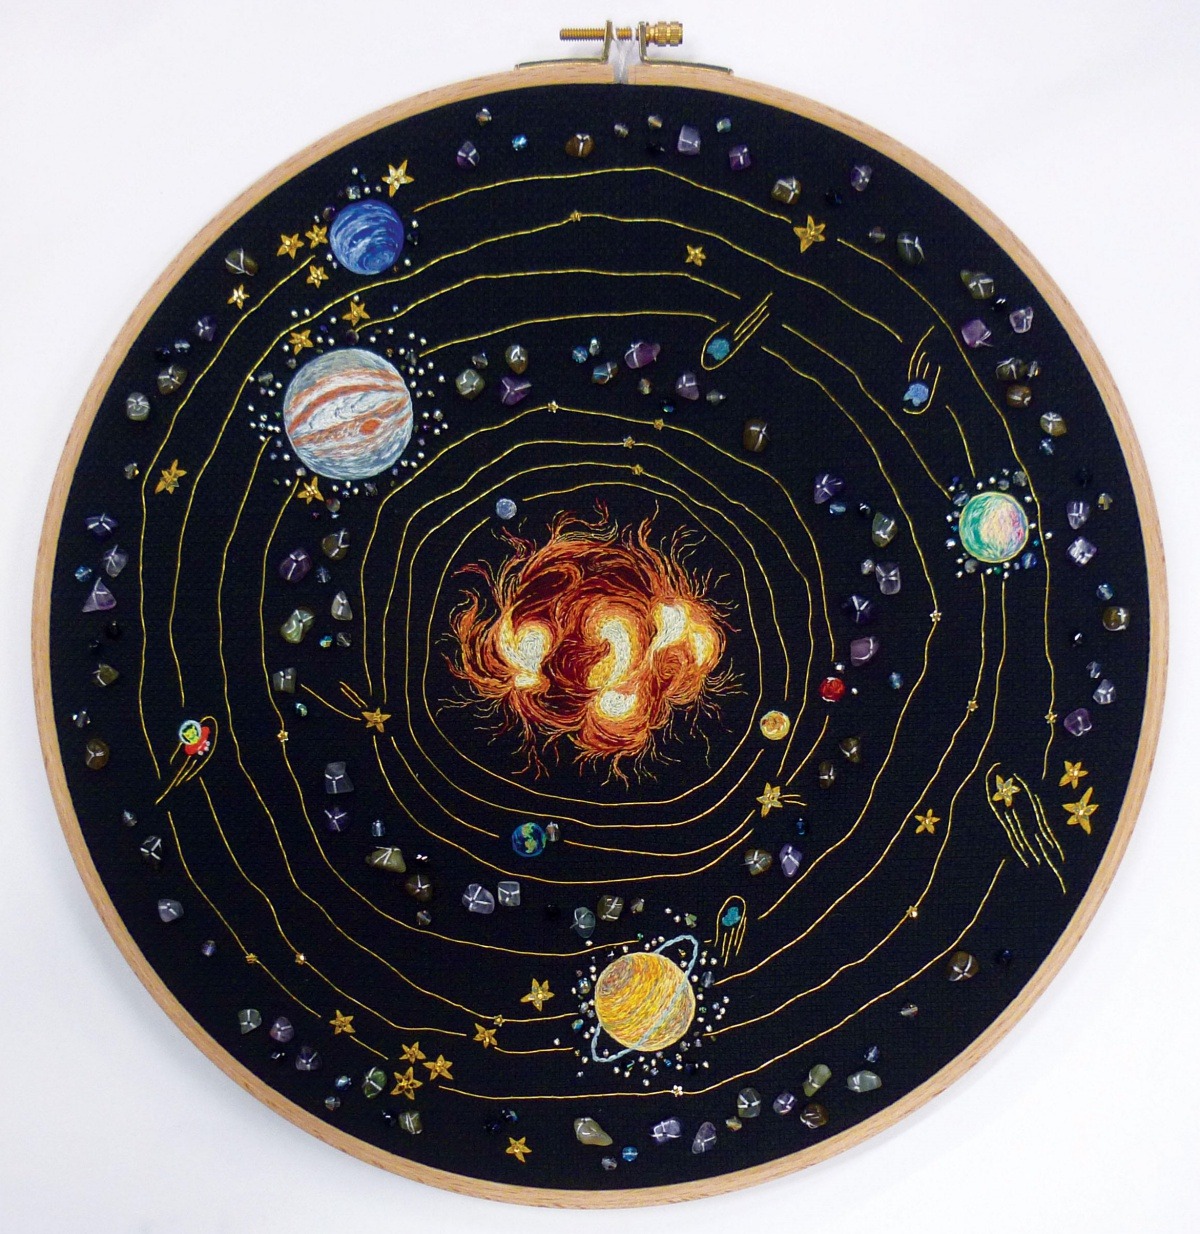 Woven Constellations and Embroidered Space by Ophelie Trichereau